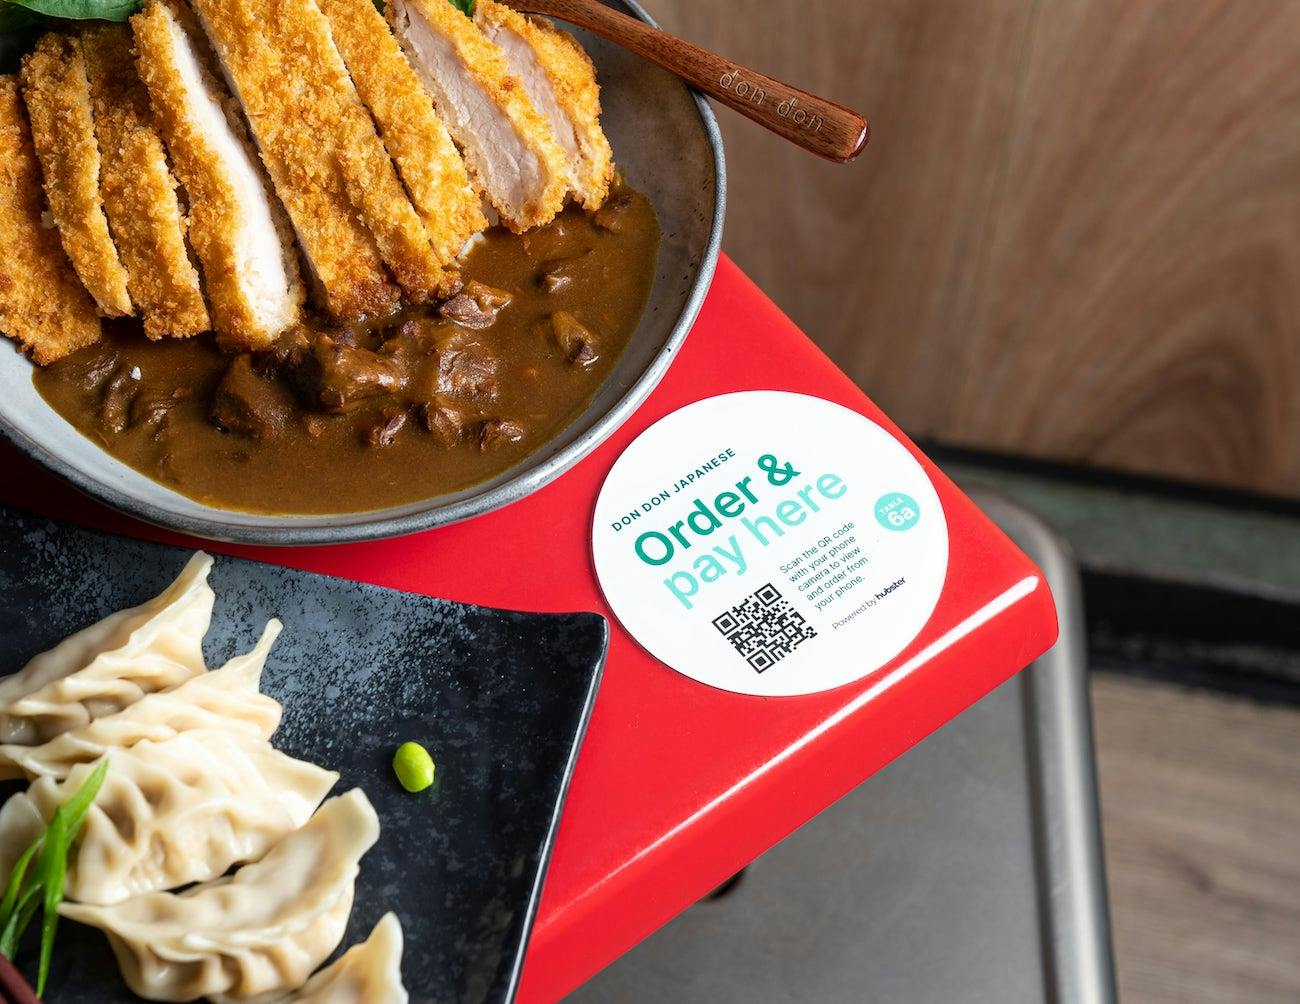 Image of a QR code ordering coaster on the corner of a table with curry rice and dumplings.